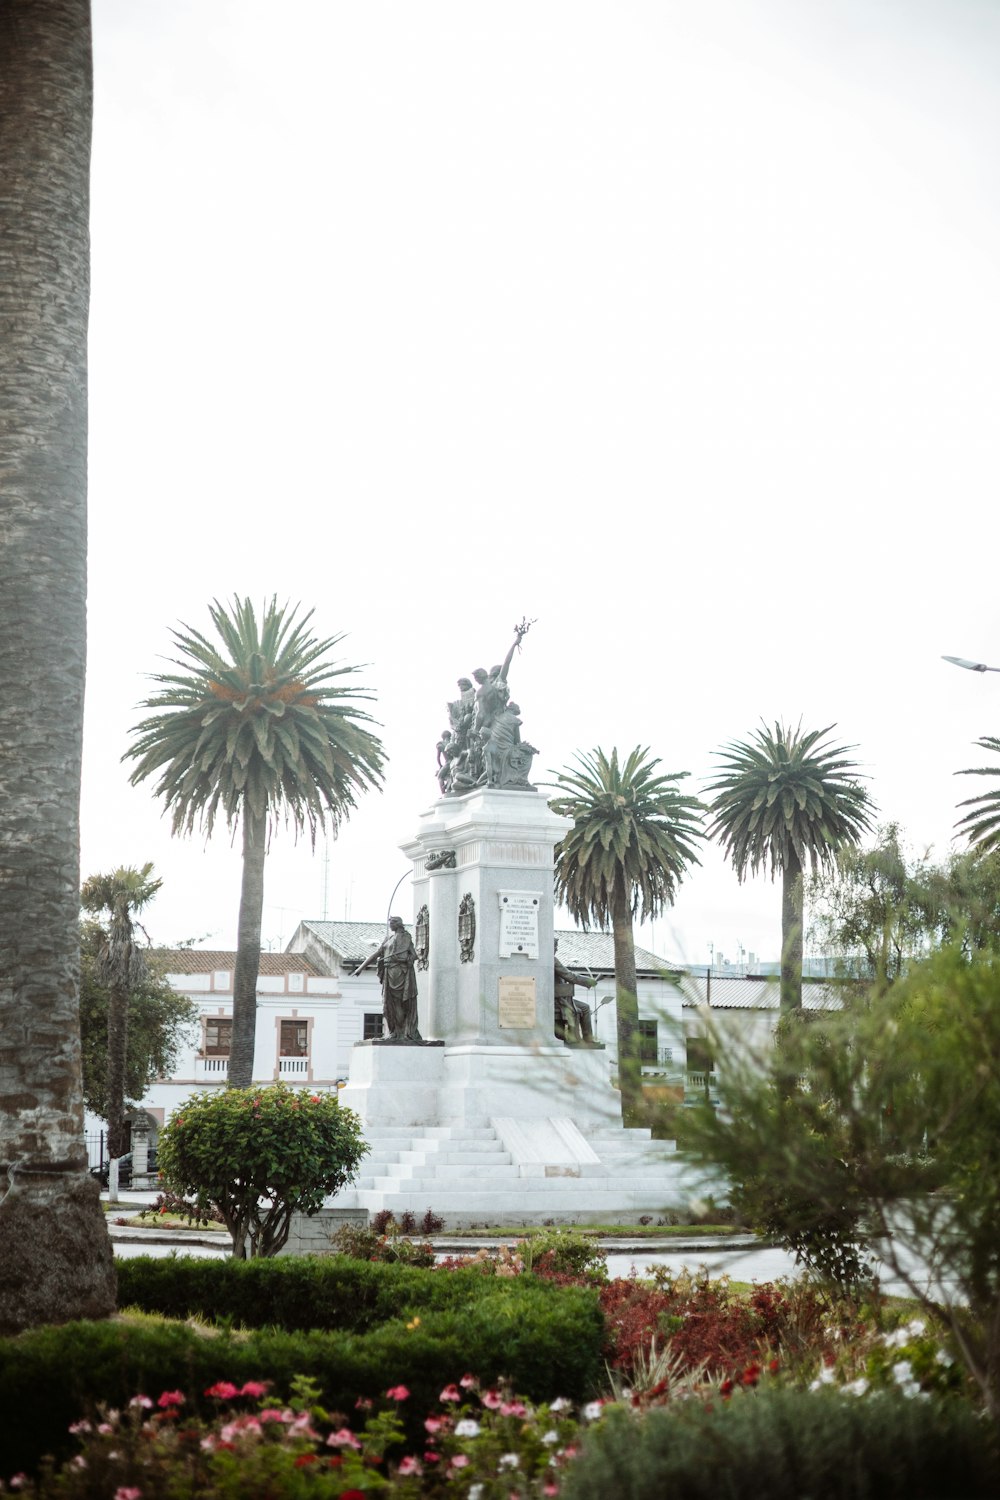 a statue in the middle of a park surrounded by palm trees